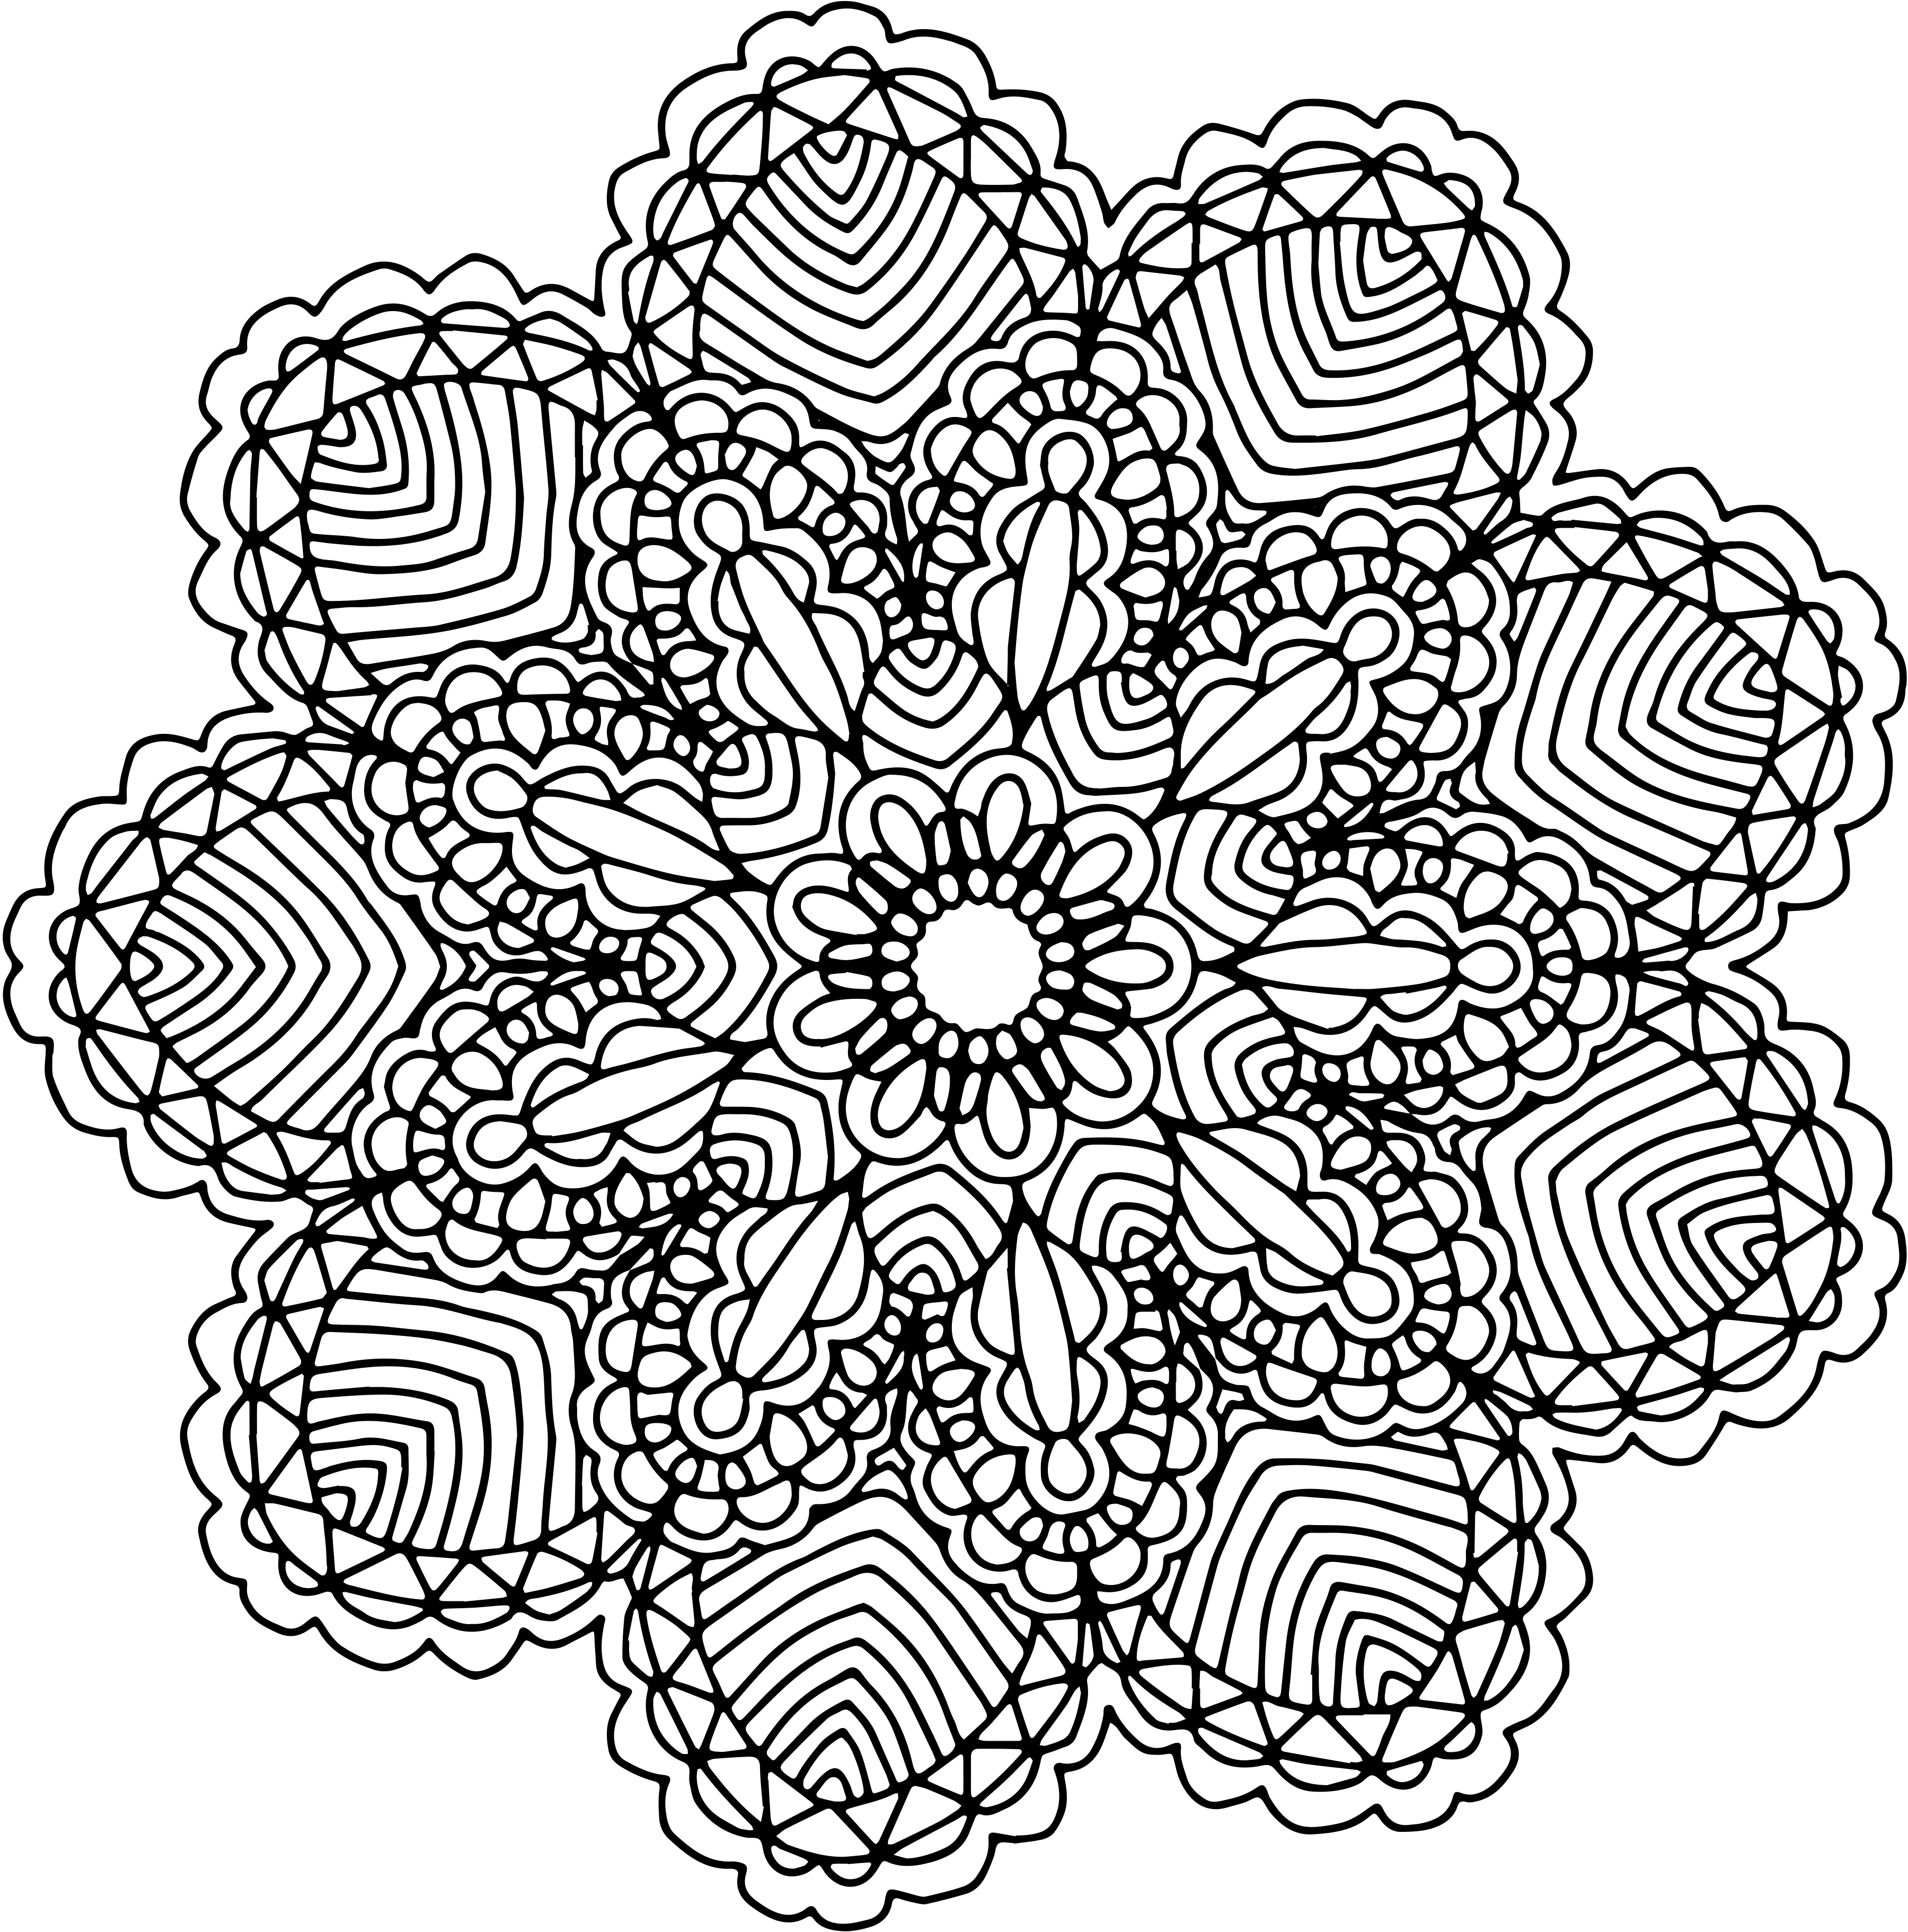 Free Graphics | Two Hand drawn Mandalas | Freebies & Deals for Graphic